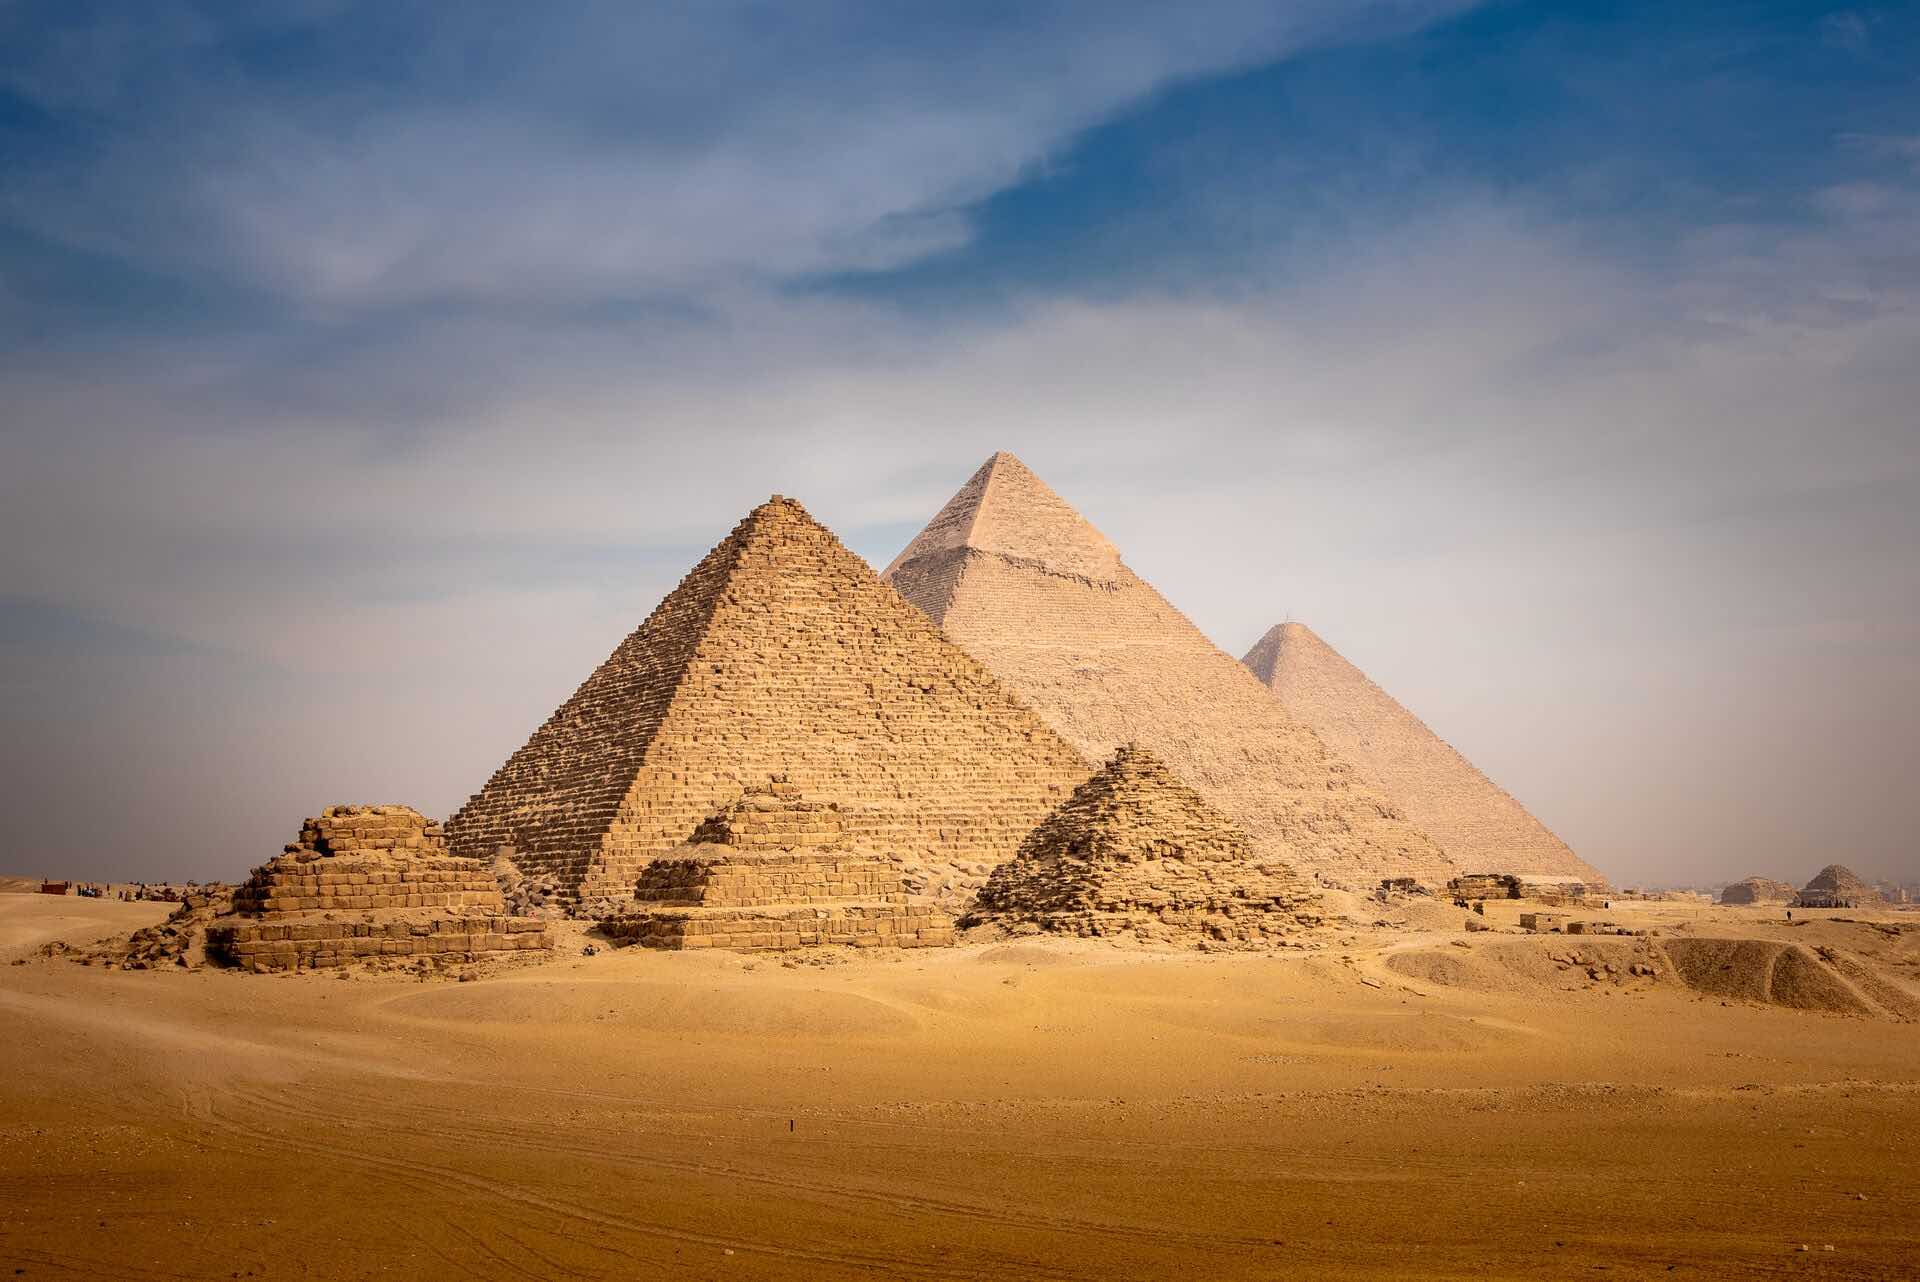 A wide andlge shot of the Great Pyramids of Giza, surrounded by sand.